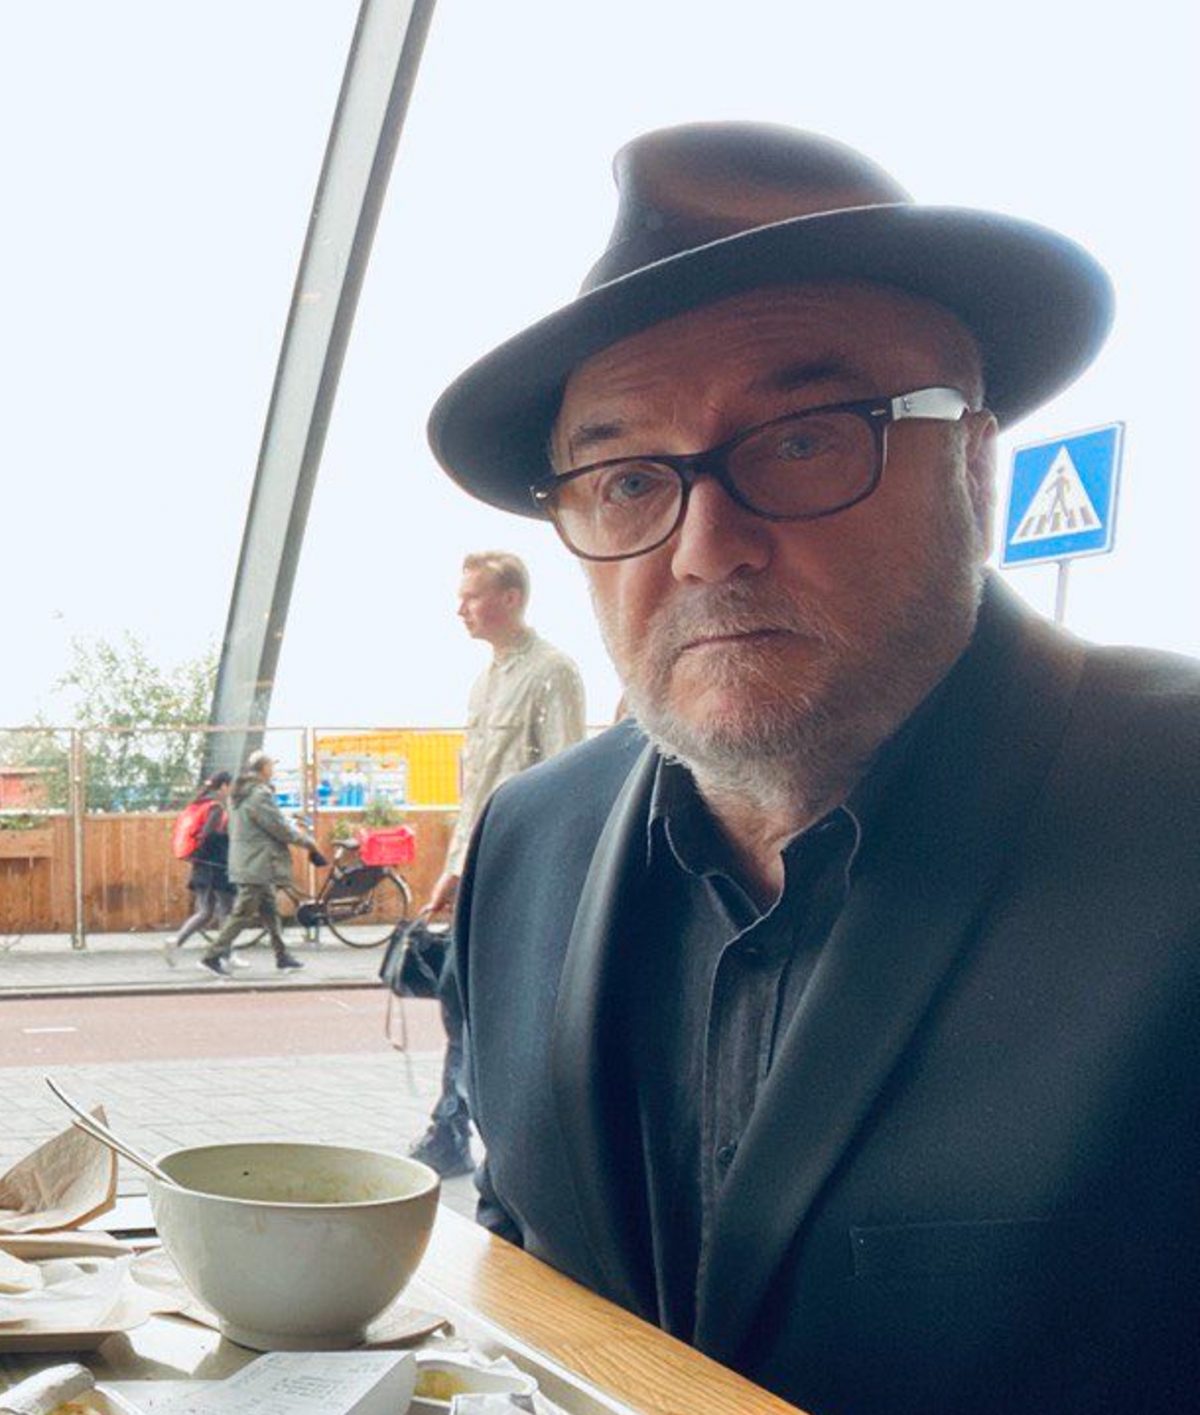 George Galloway claims his daughter was told “get back to Engl